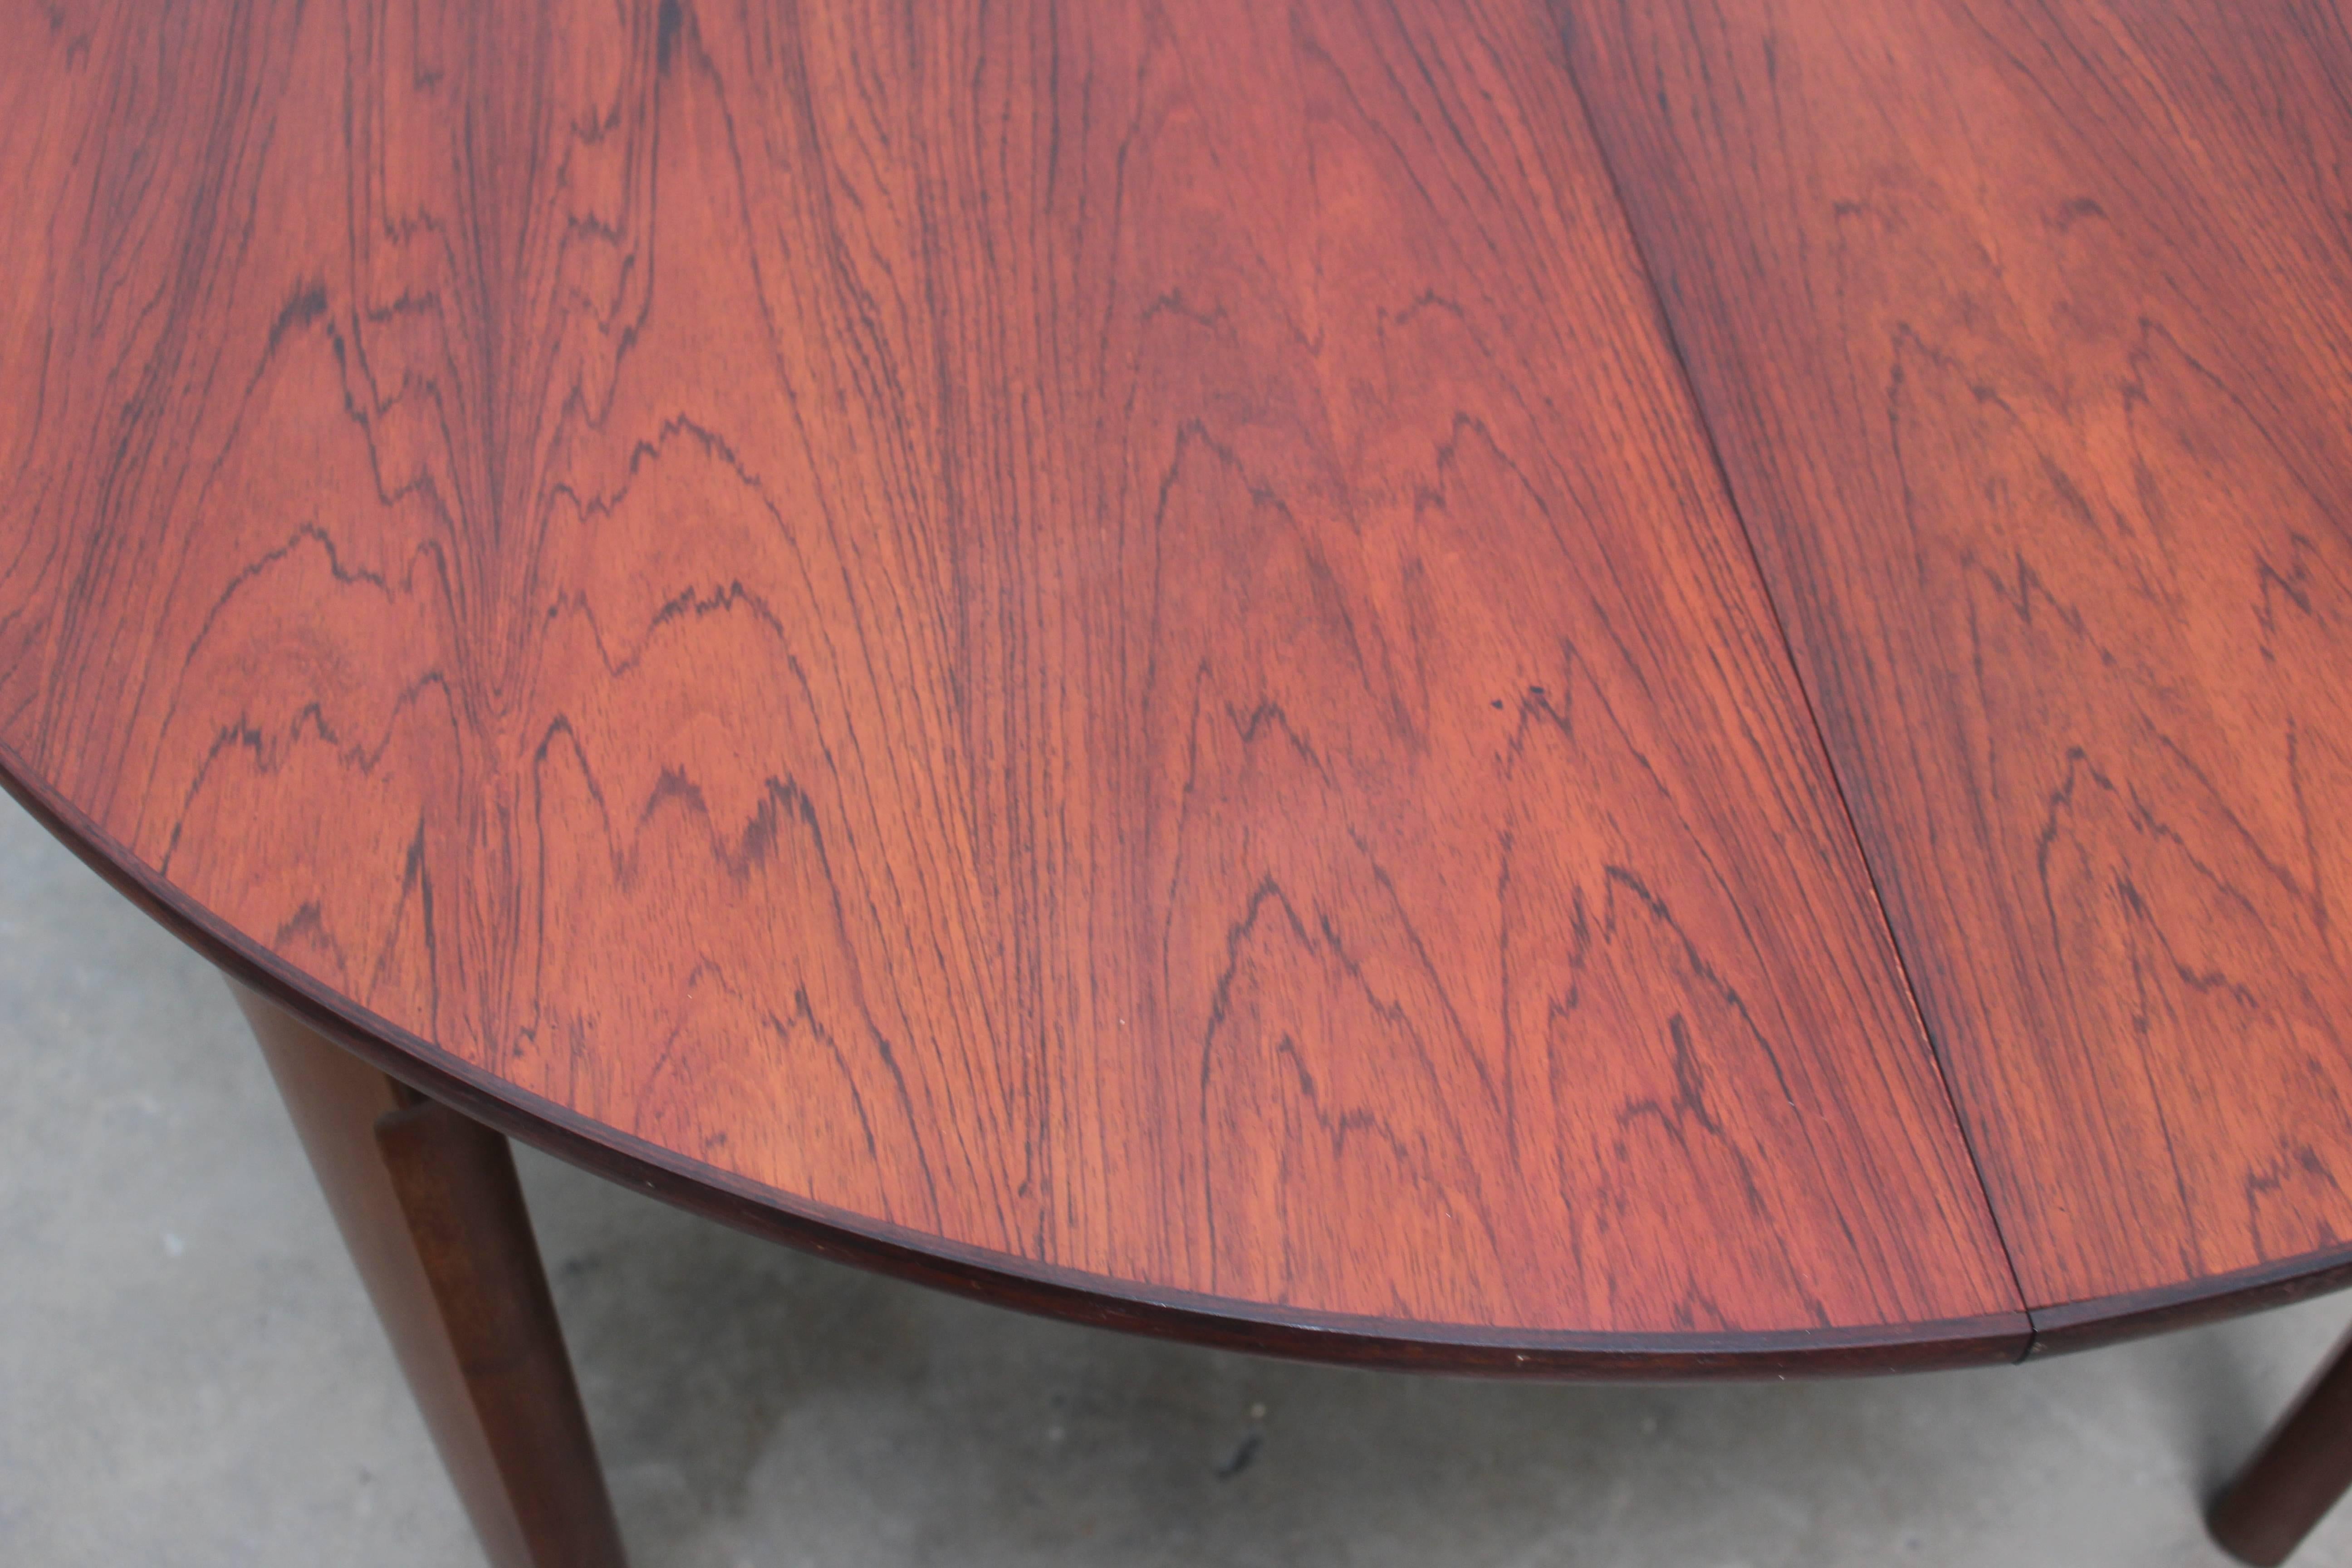 Round Rosewood Dining Table, Scandinavian Modern, circa 1950s For Sale 2